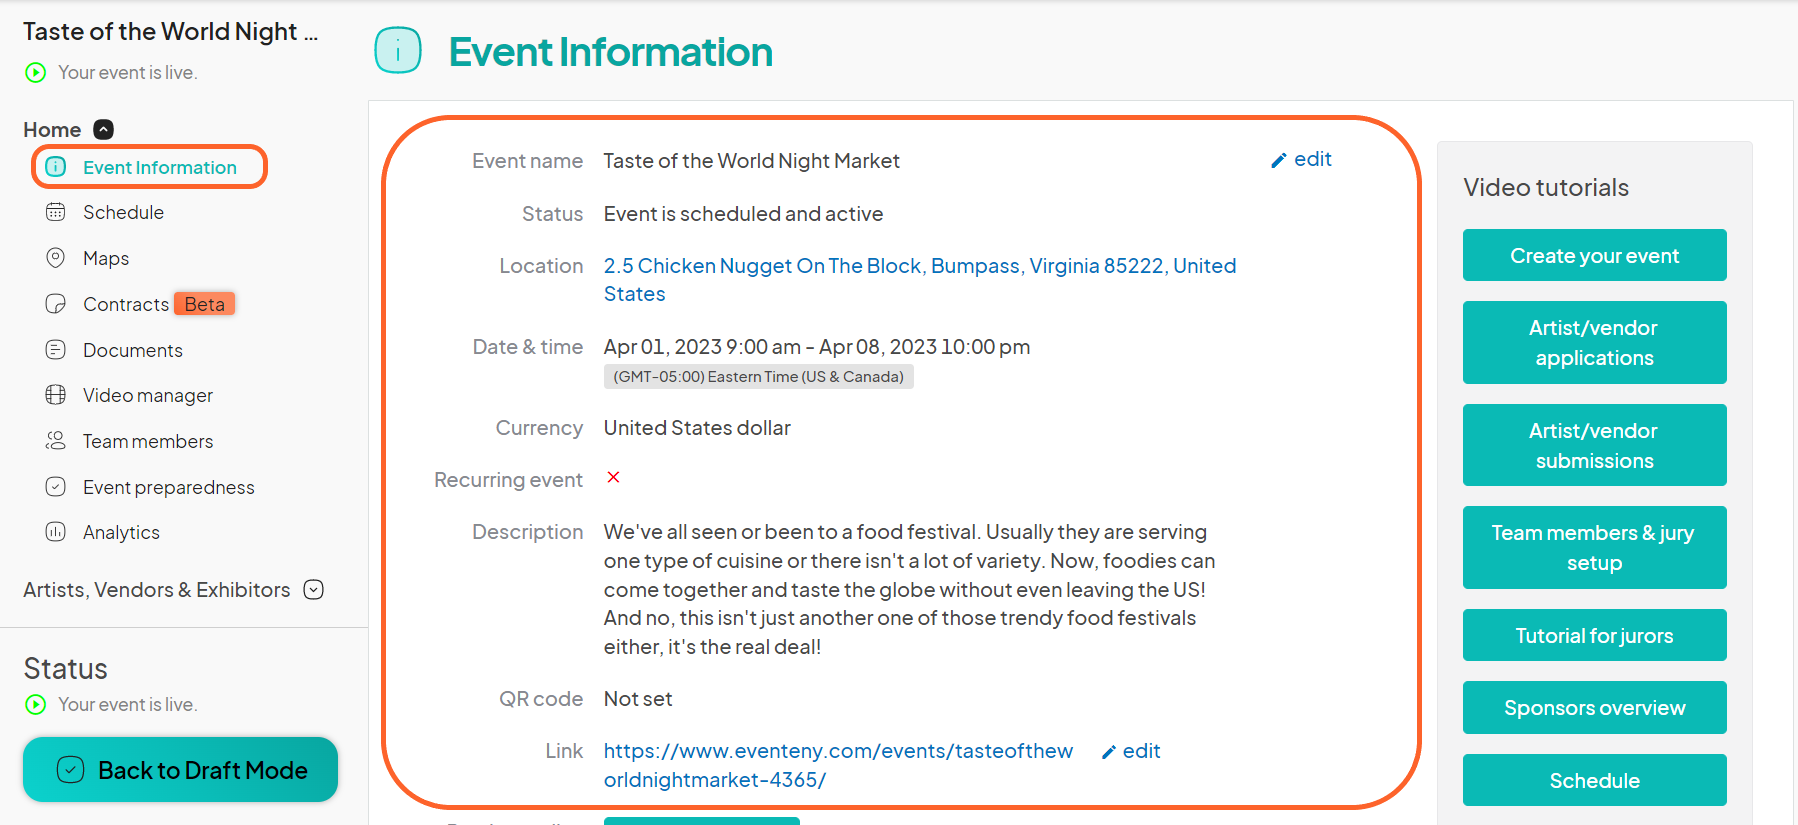 an image showing users their event information under the home tab on the event dashboard